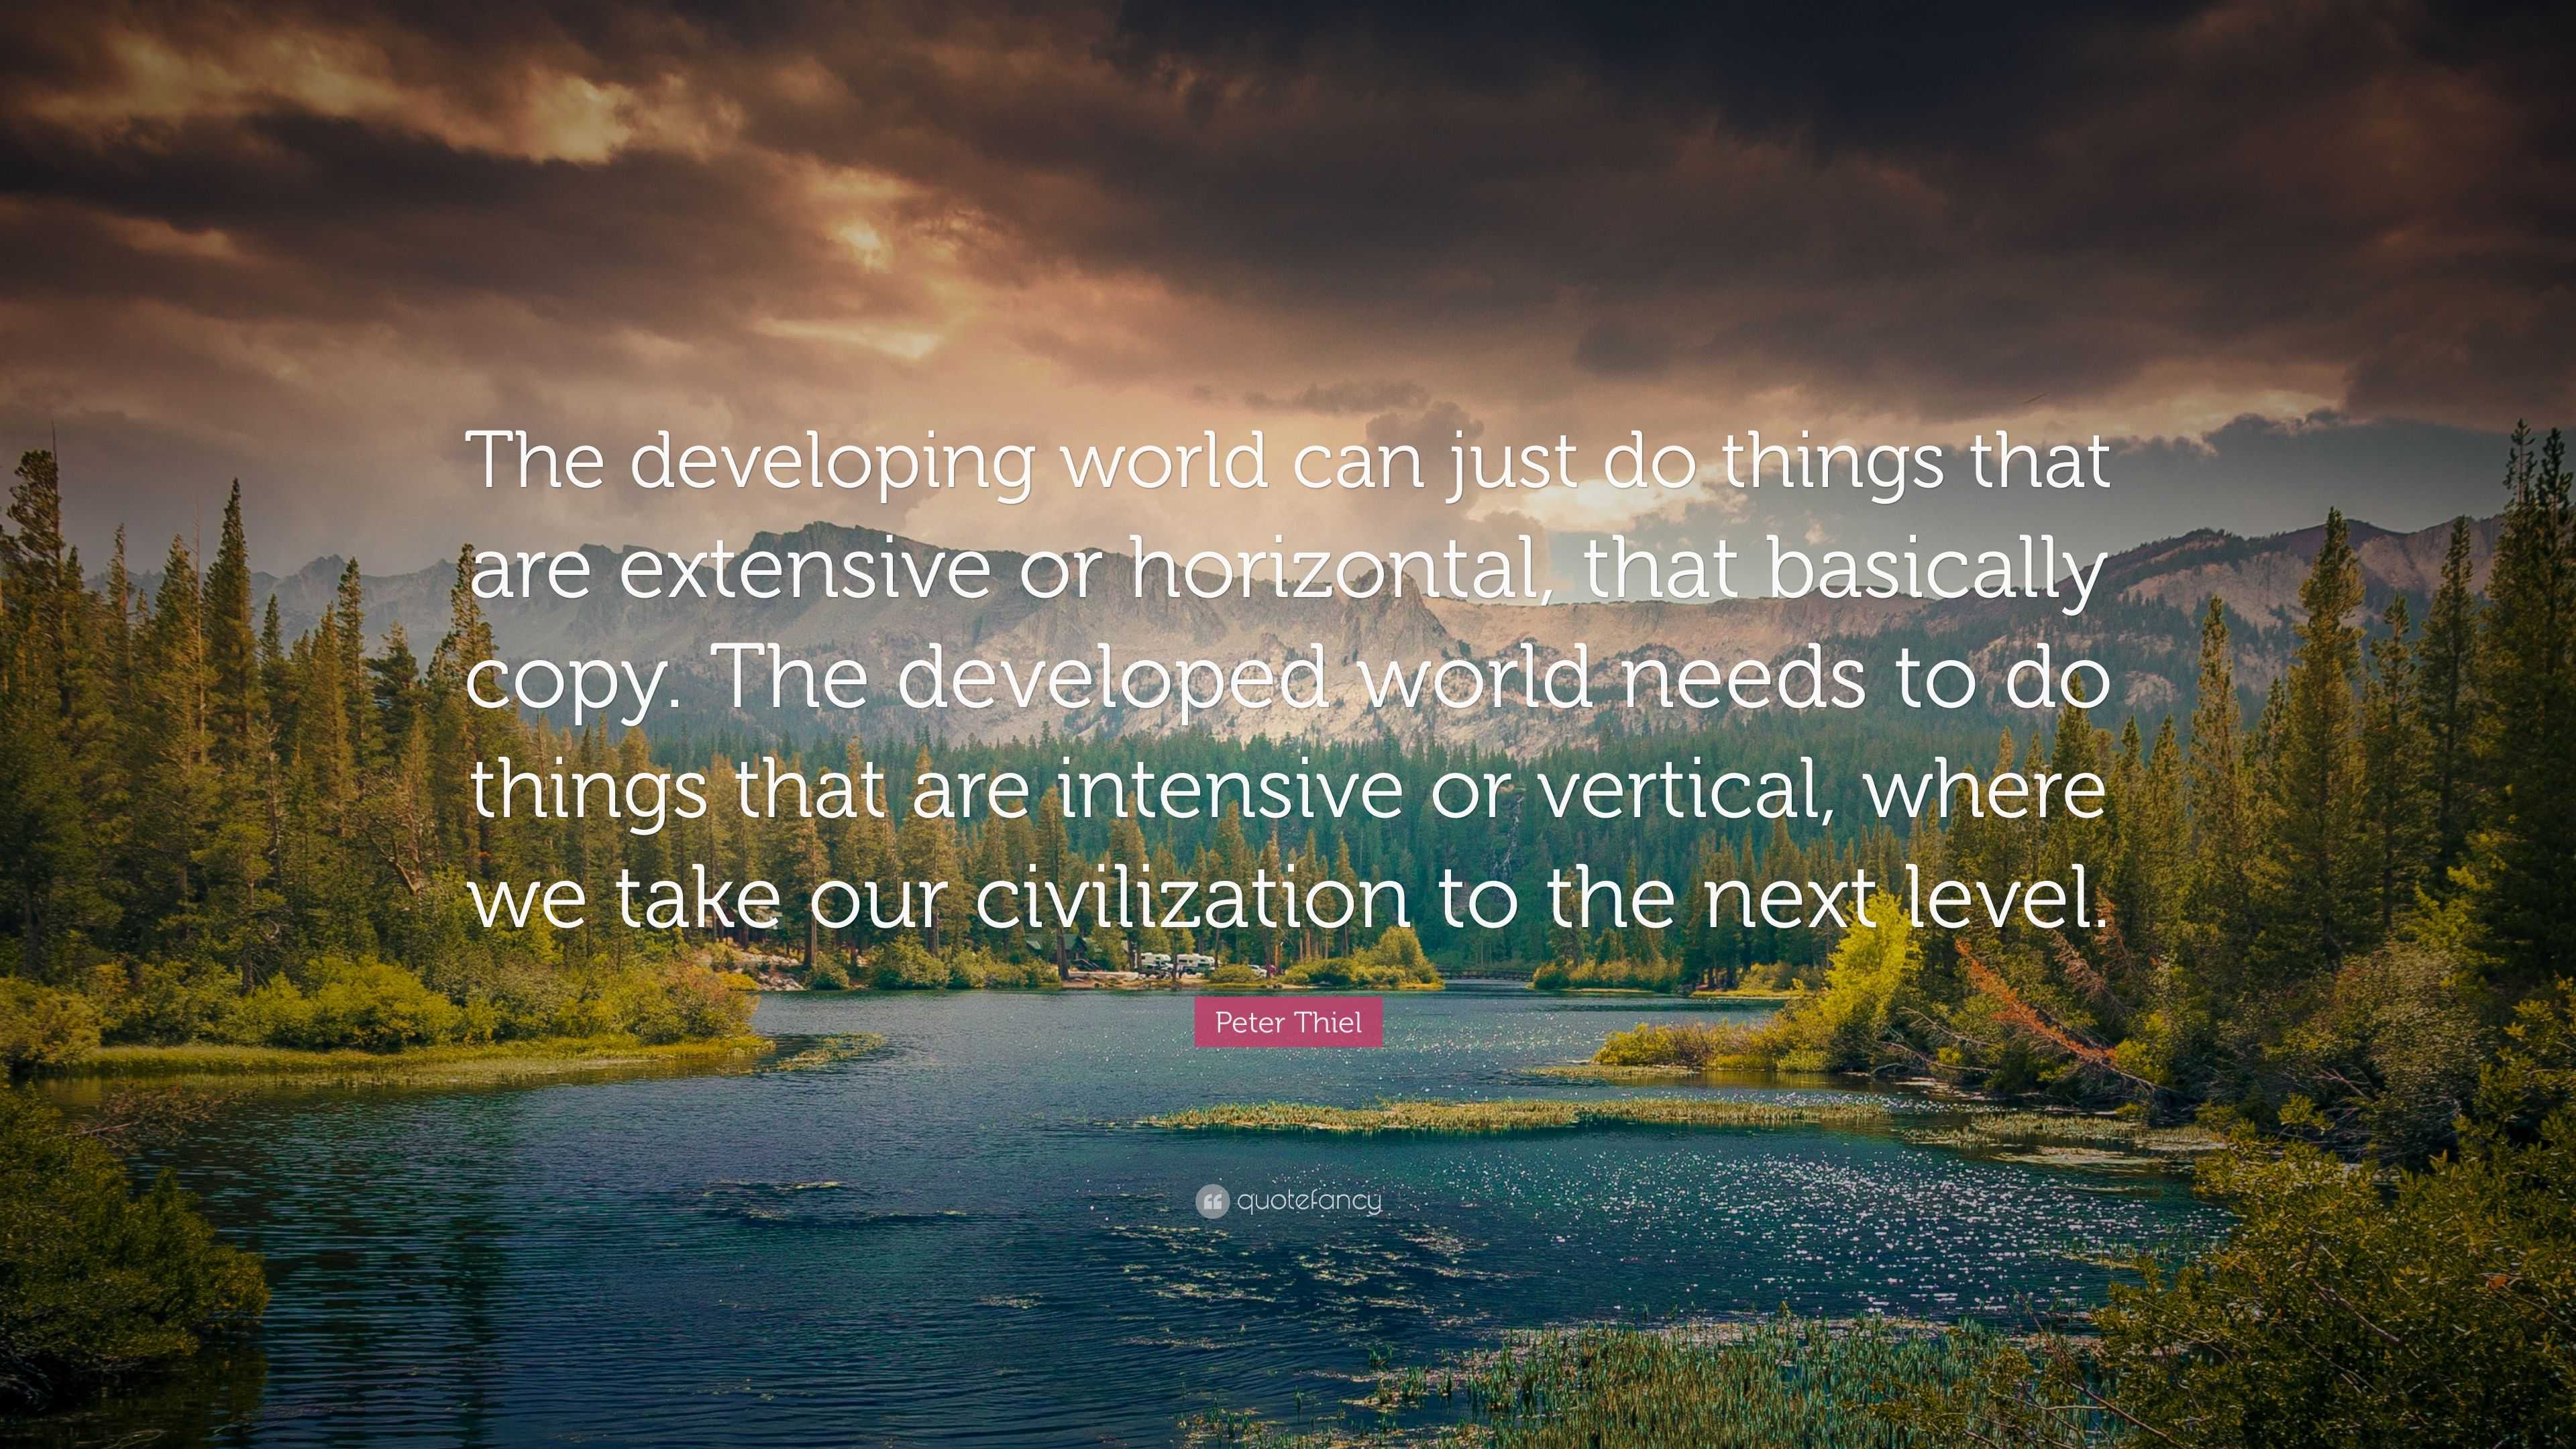 Peter Thiel Quote: “The developing world can just do things that are ...